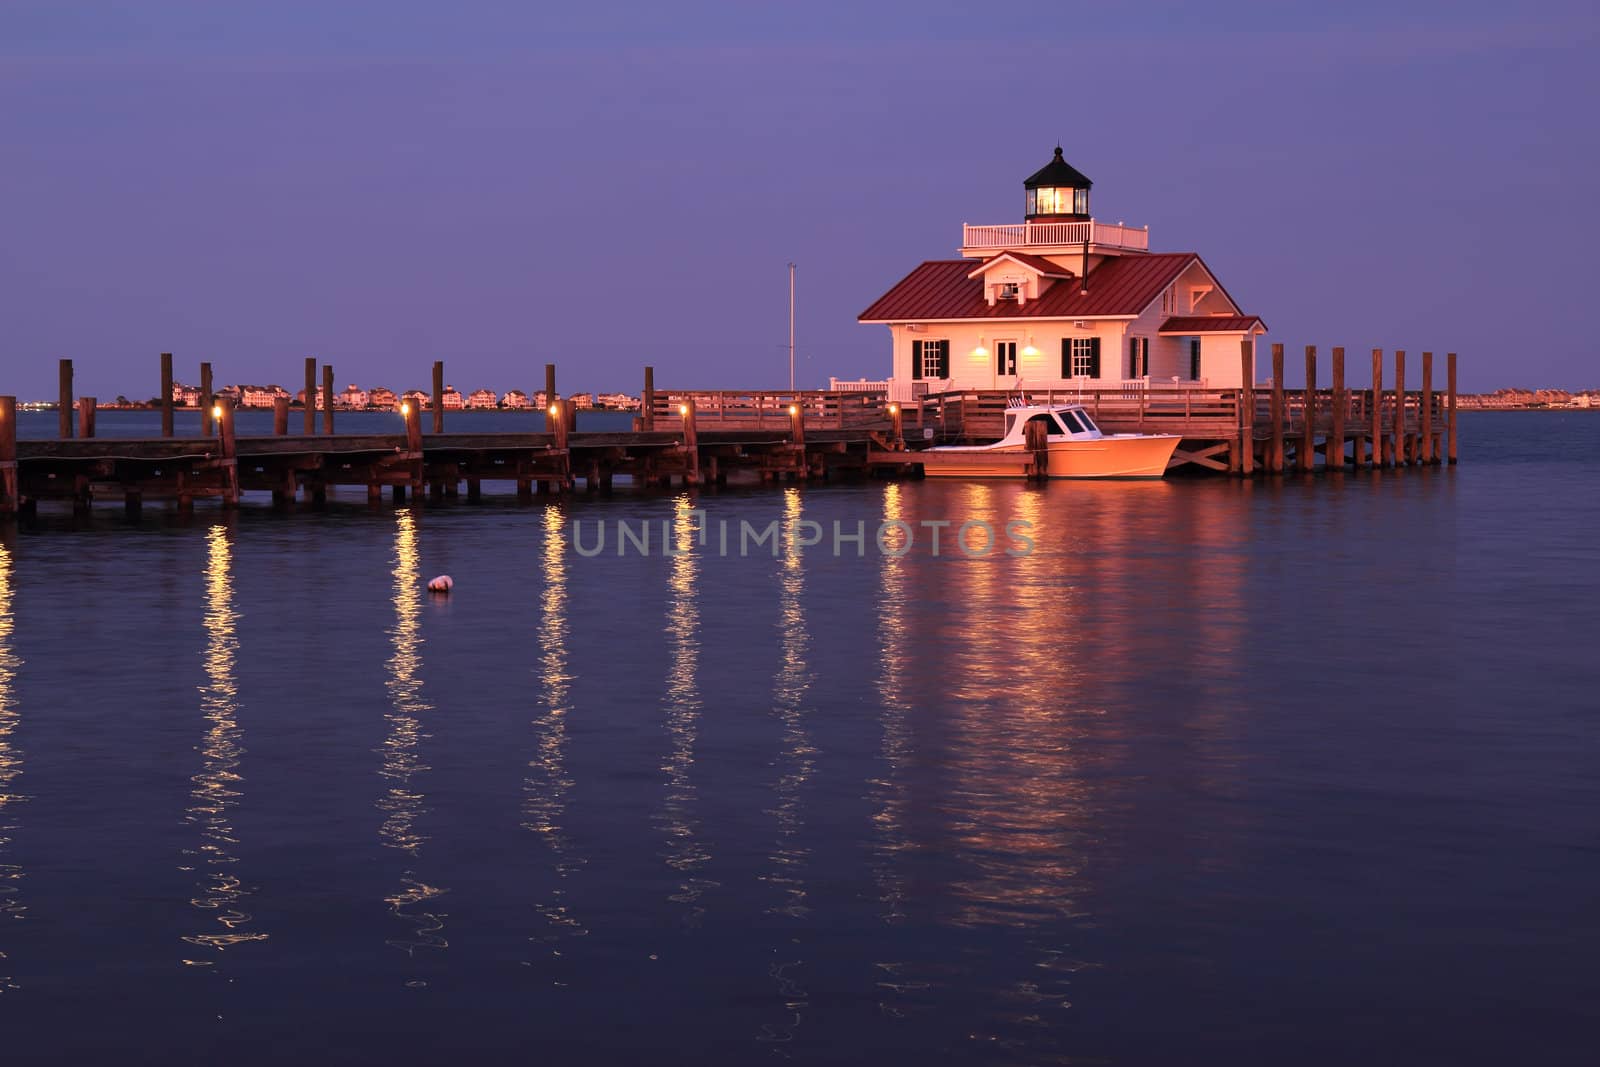 The Roanoke Marshes Lighthouse in Manteo, North Carolina, at dus by sgoodwin4813